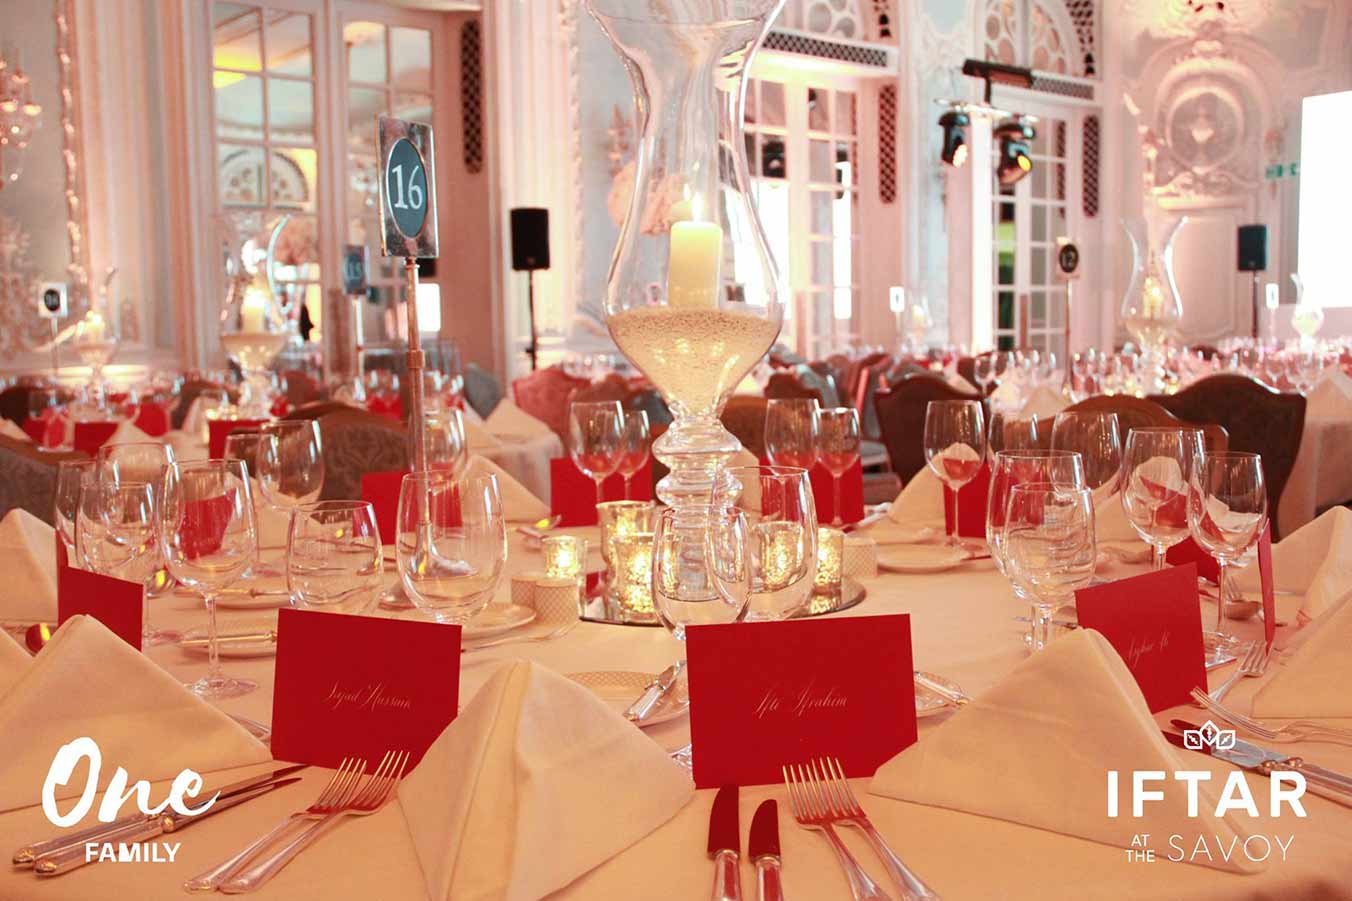 Corporate event with red envelopes with calligraphy from Edward Curran